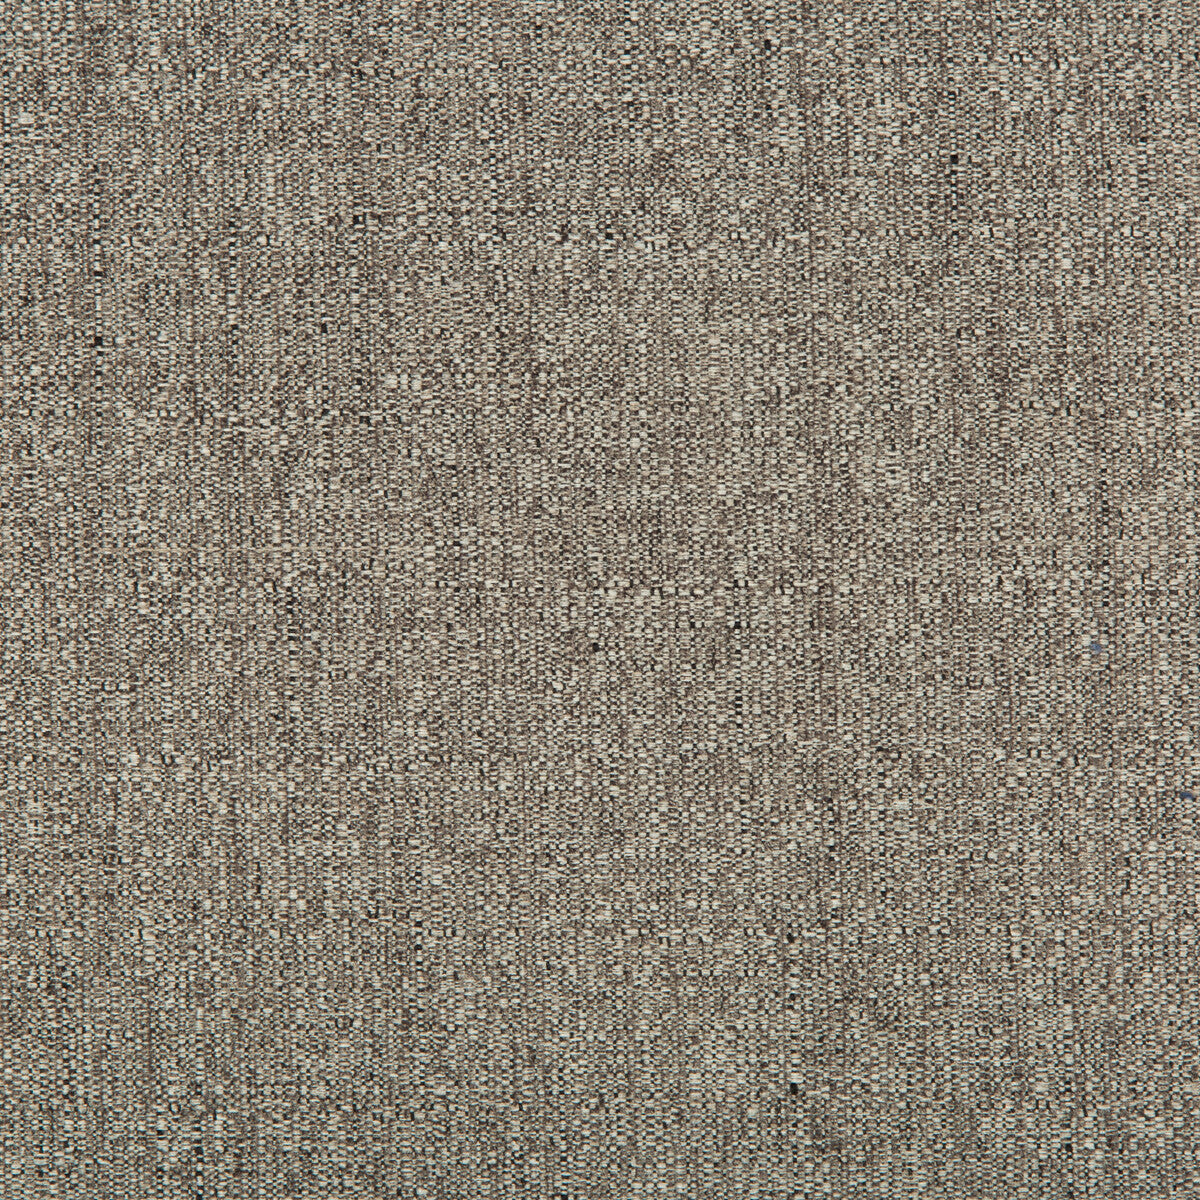 Kravet Contract fabric in 35479-21 color - pattern 35479.21.0 - by Kravet Contract